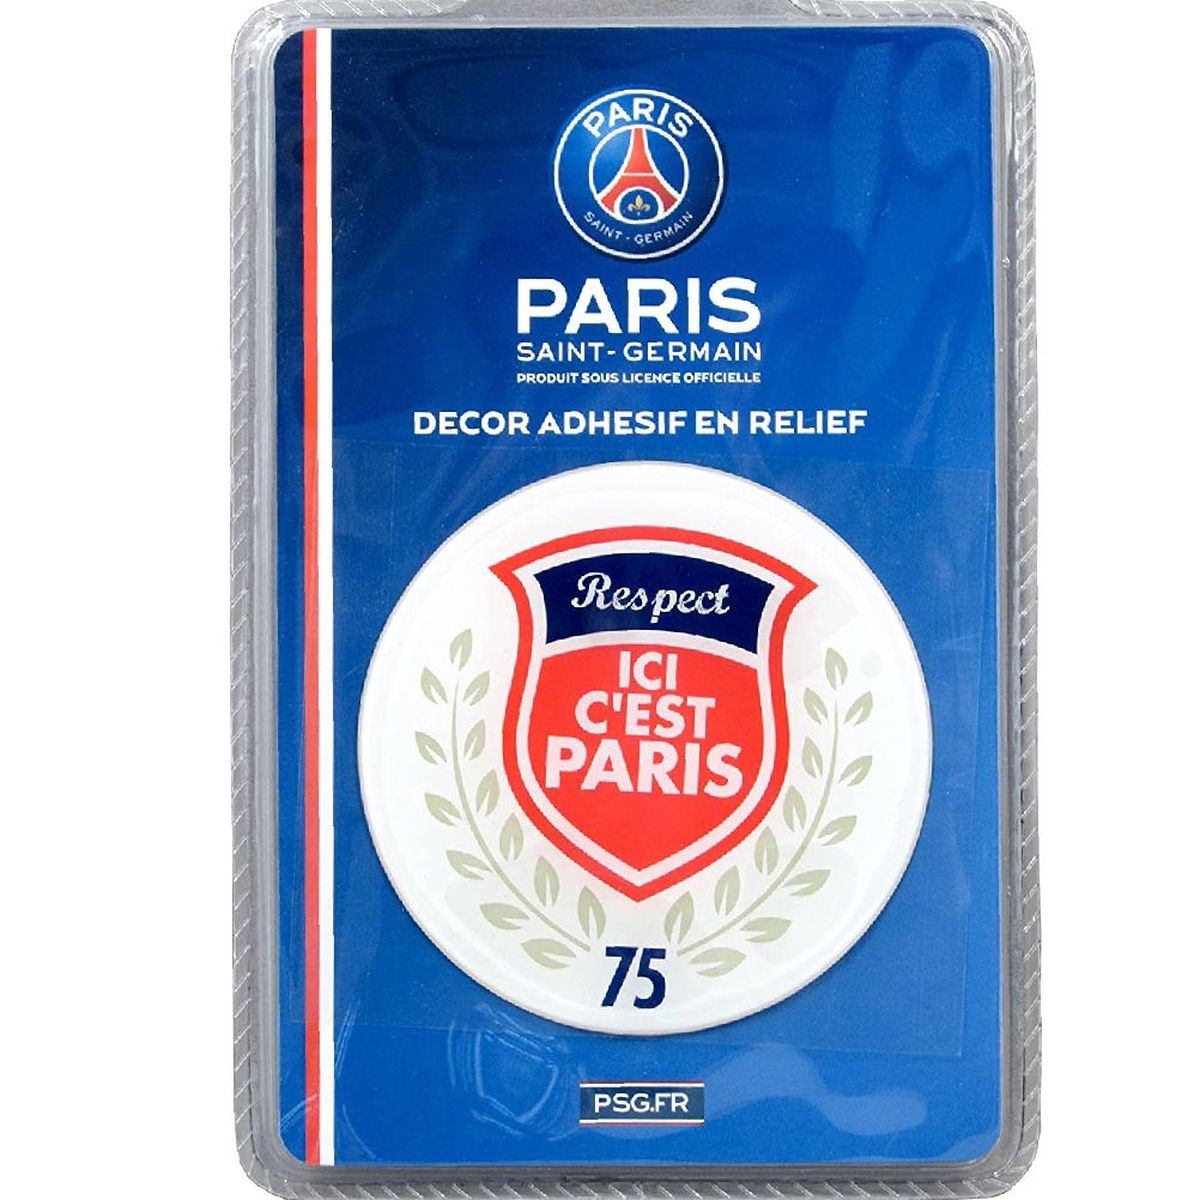 Adhesive decoration in relief PSG